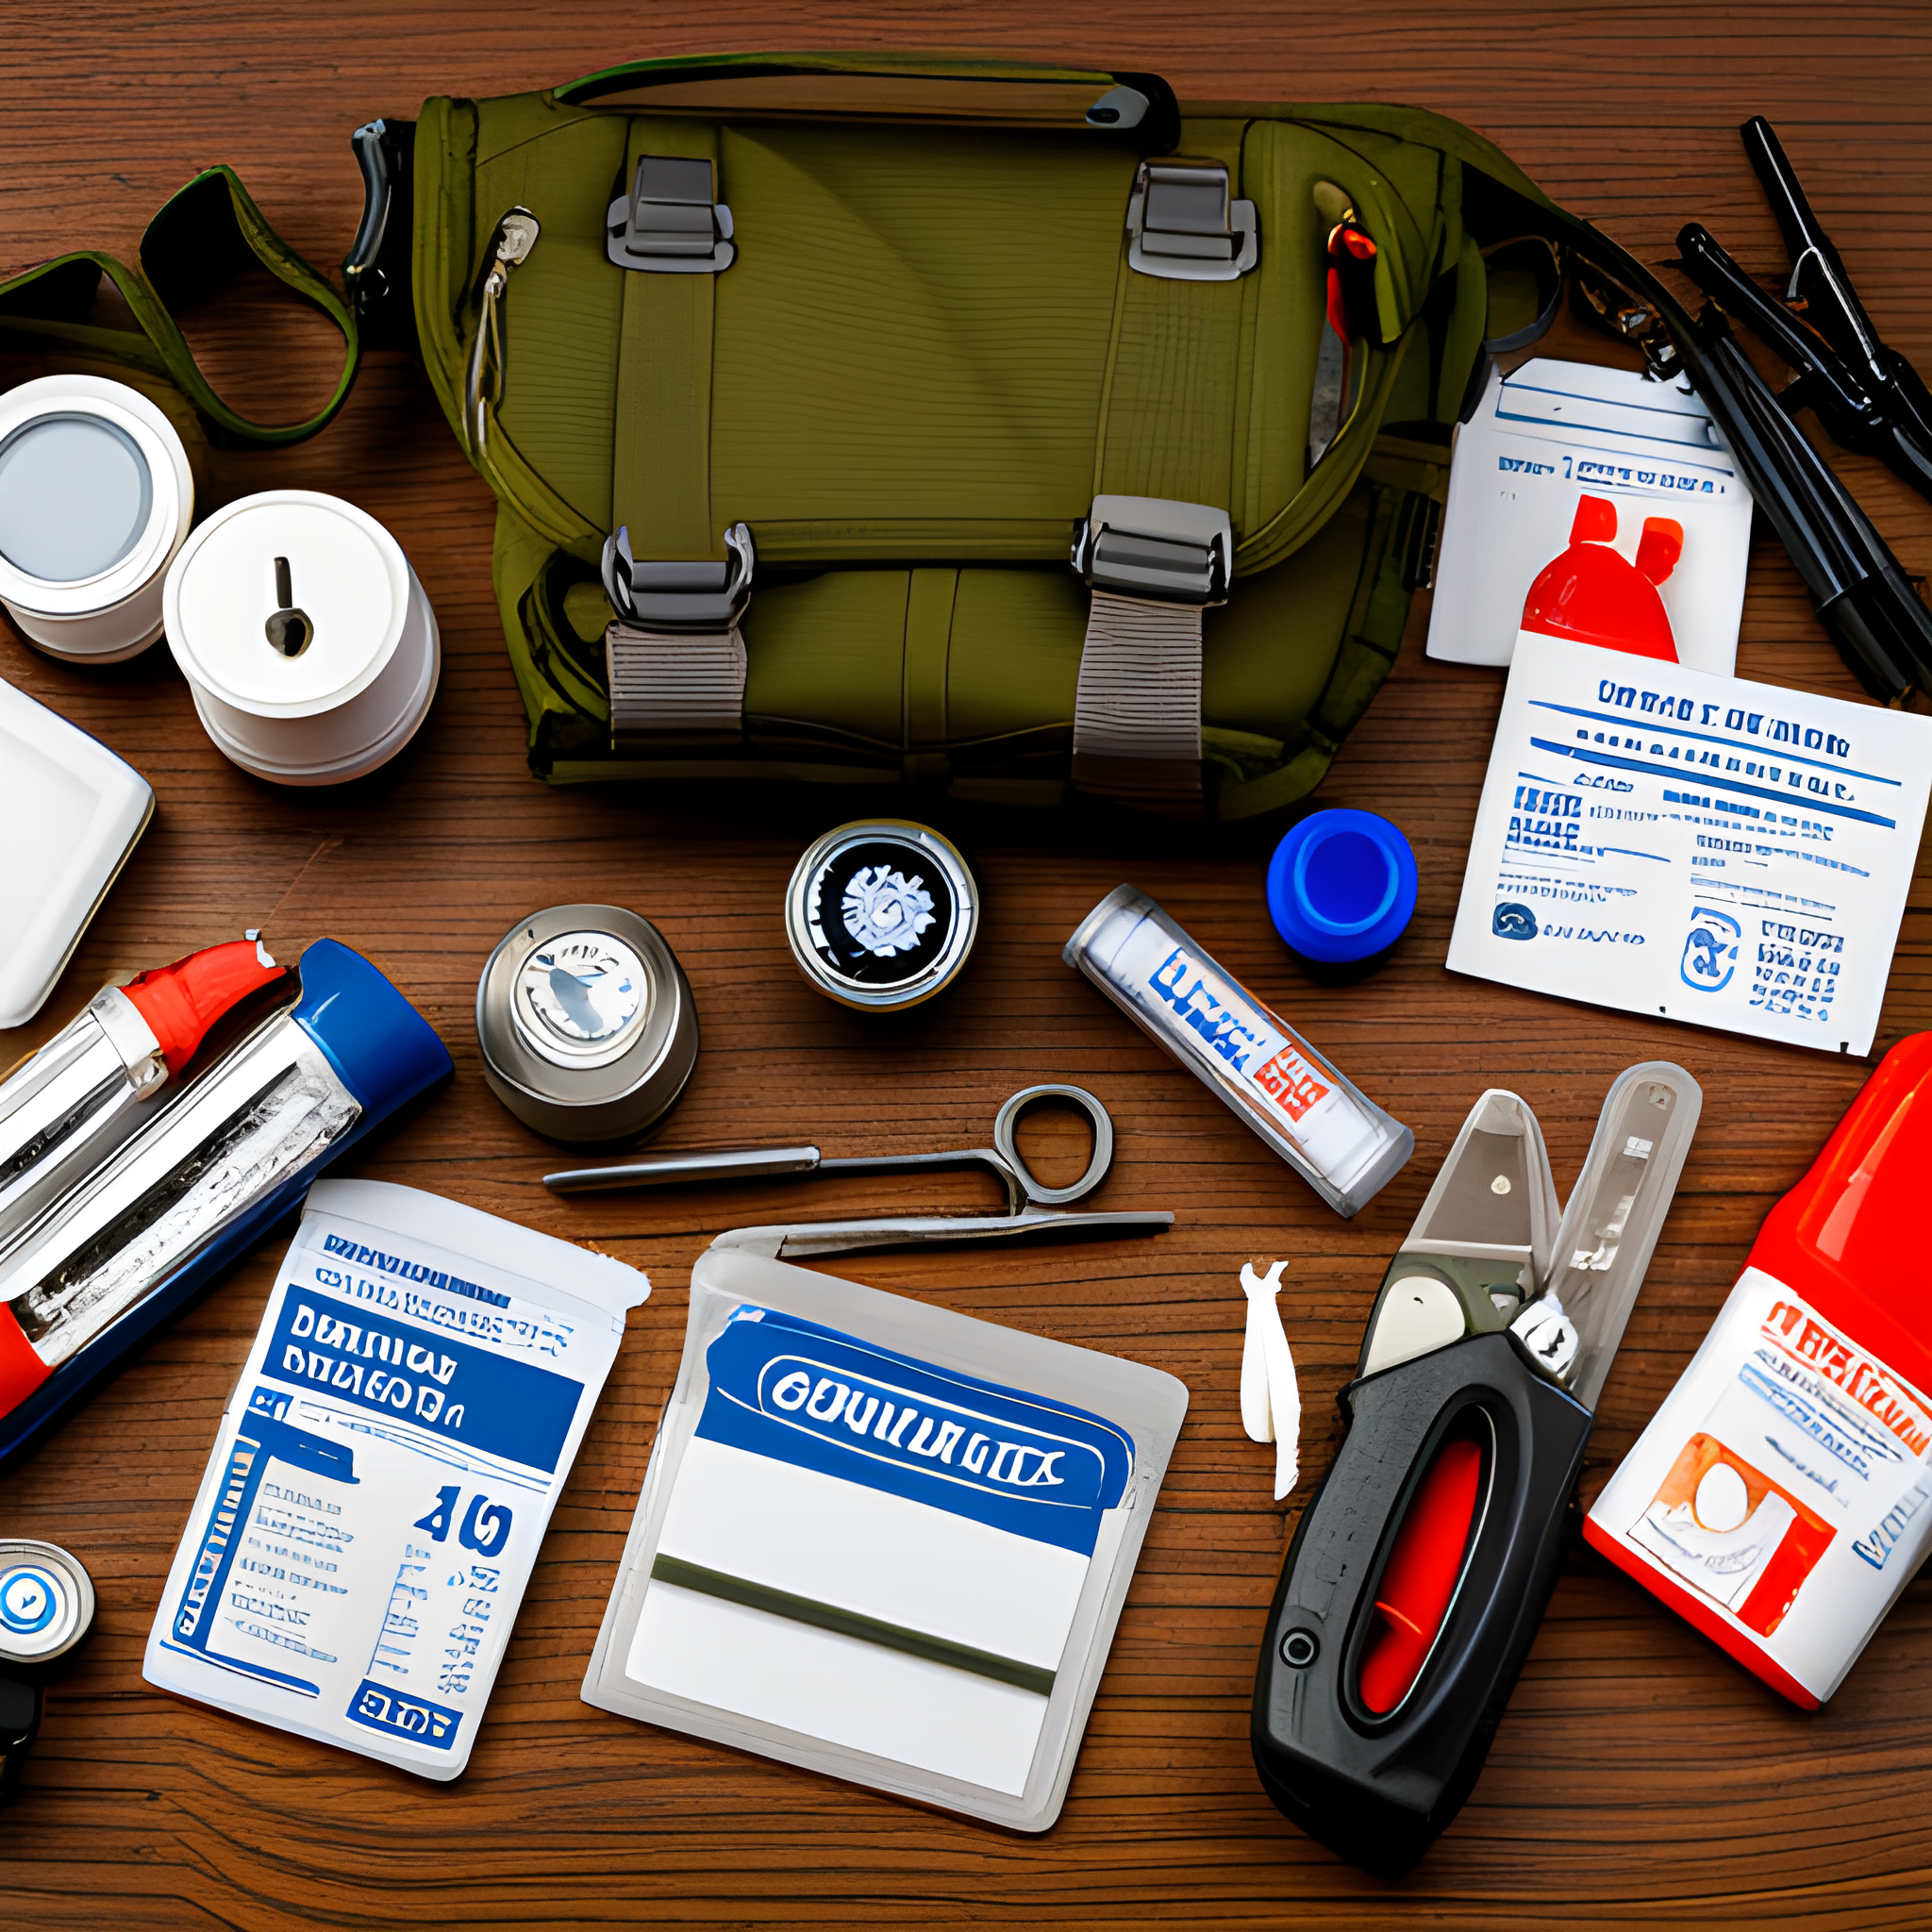 The Essential Guide to Your Survival Kit: Preparing for Wilderness Survival